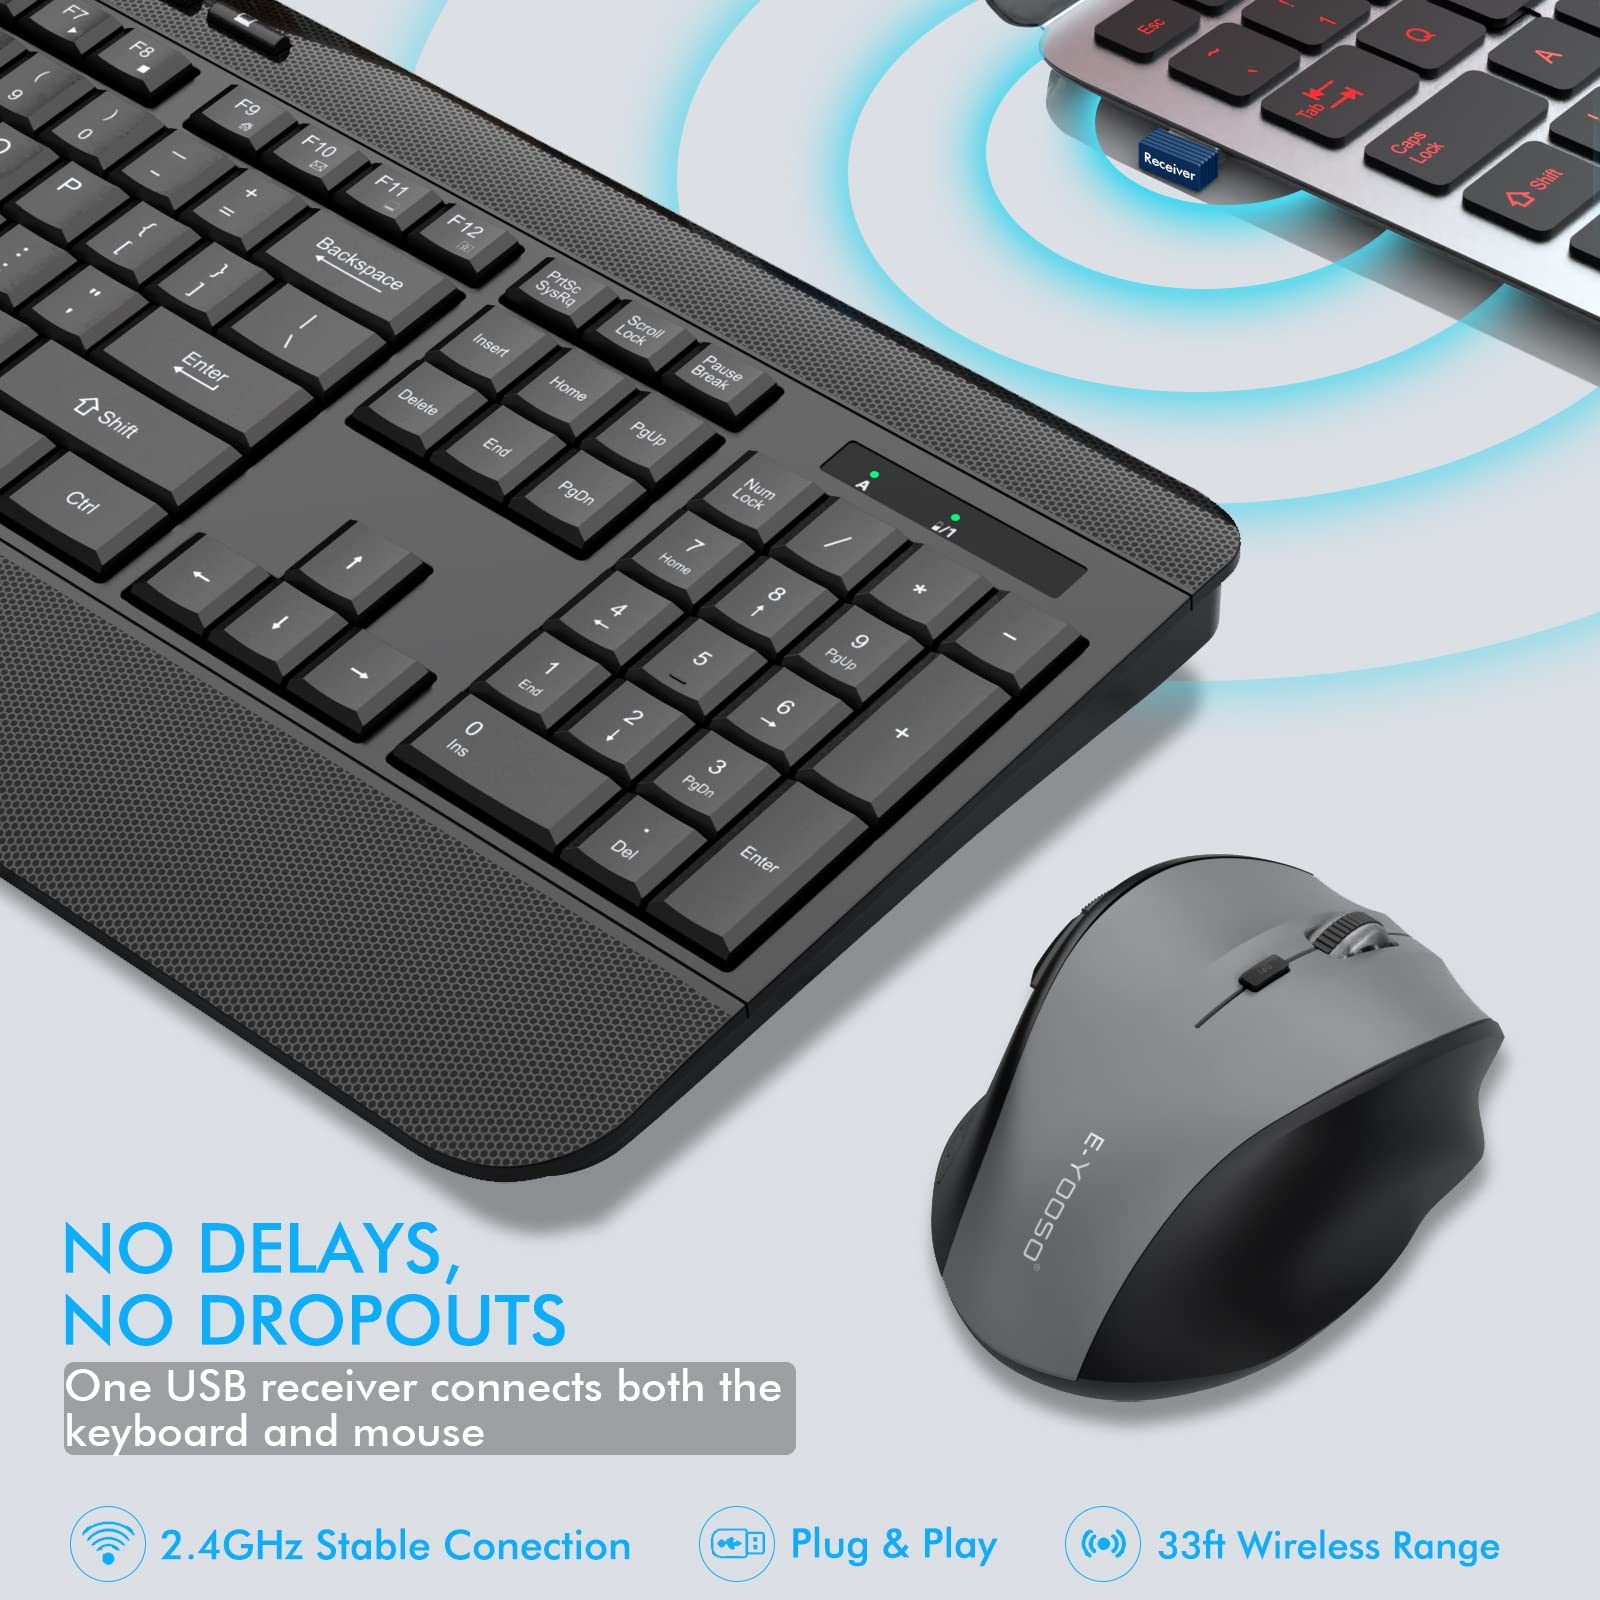 Wireless Keyboard and Mouse Combo, E-YOOSO 2.4G Full-Sized Ergonomic Keyboard Mouse Combo with Wrist Rest, 3 DPI Adjustable Wireless Optical Mice with USB Nano Receiver for Laptop/Windows/Mac OS/PC